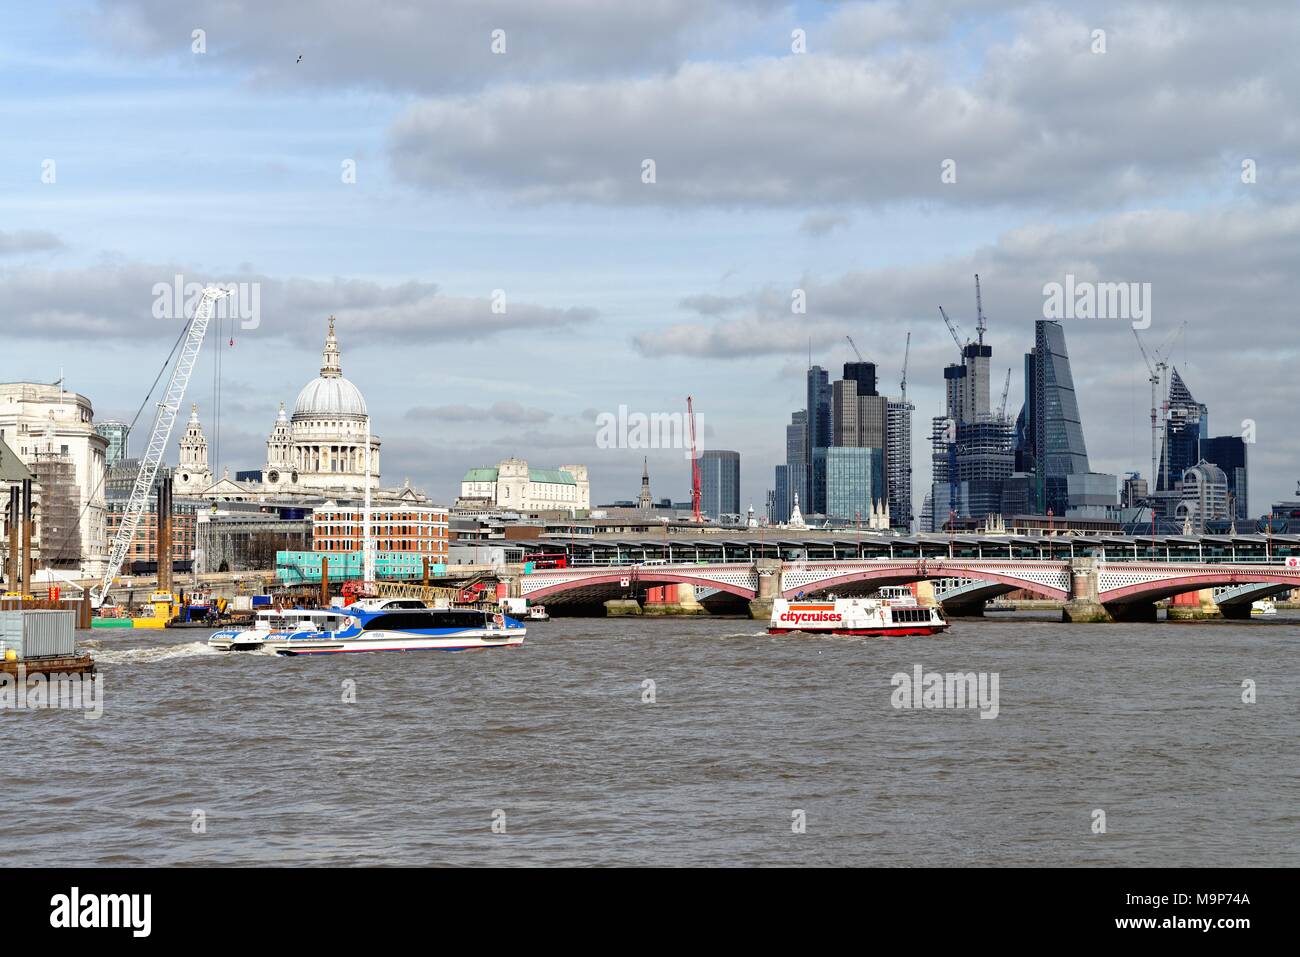 Skyline of the City of London showing ongoing construction projects and the River Thames England UK Stock Photo